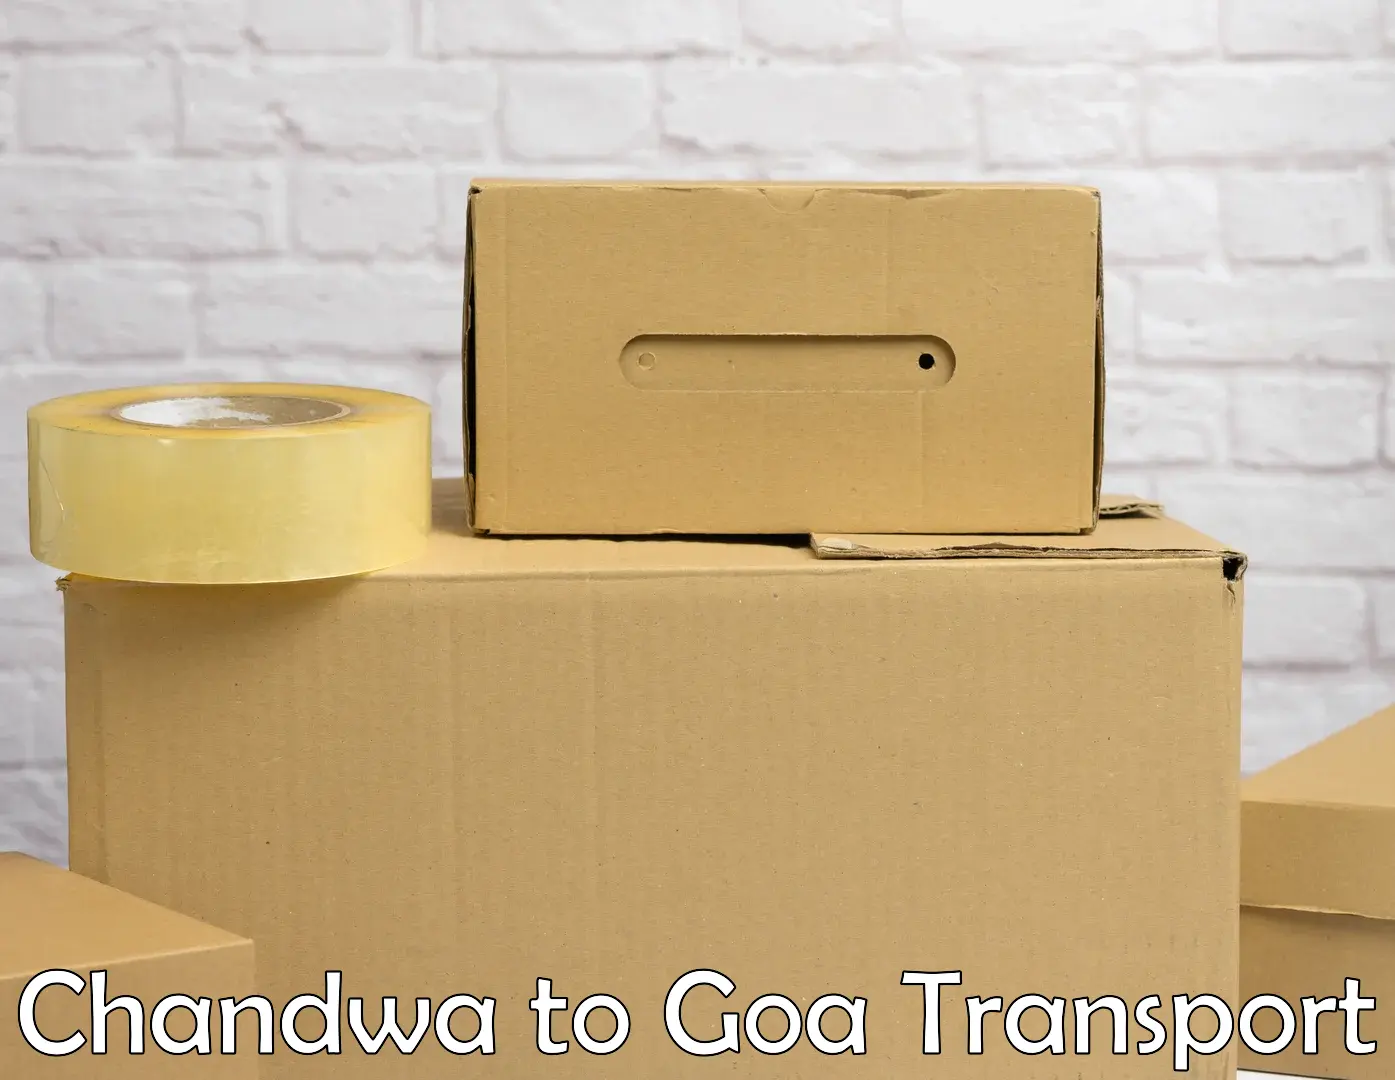 Road transport online services Chandwa to Panaji